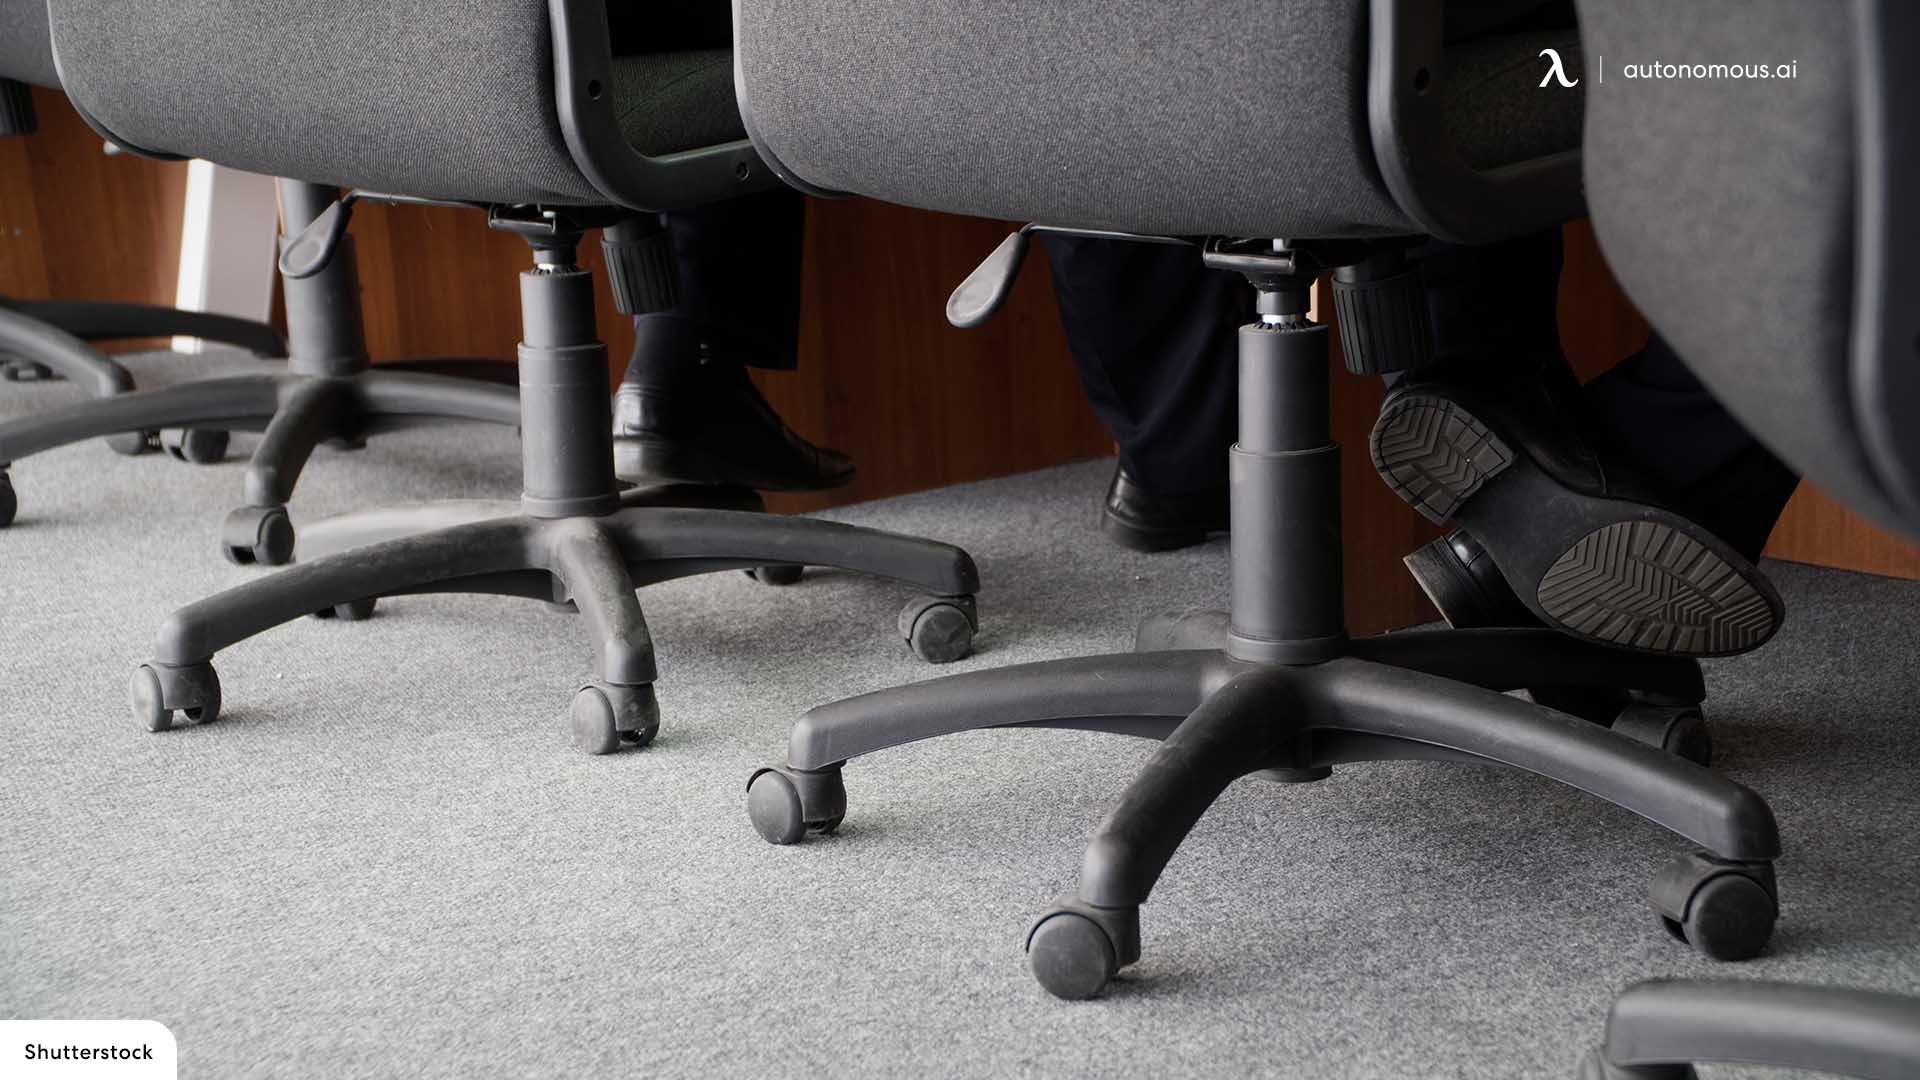 Heavy Duty Office Chairs: 20 Best 300lbs - 400lbs Options